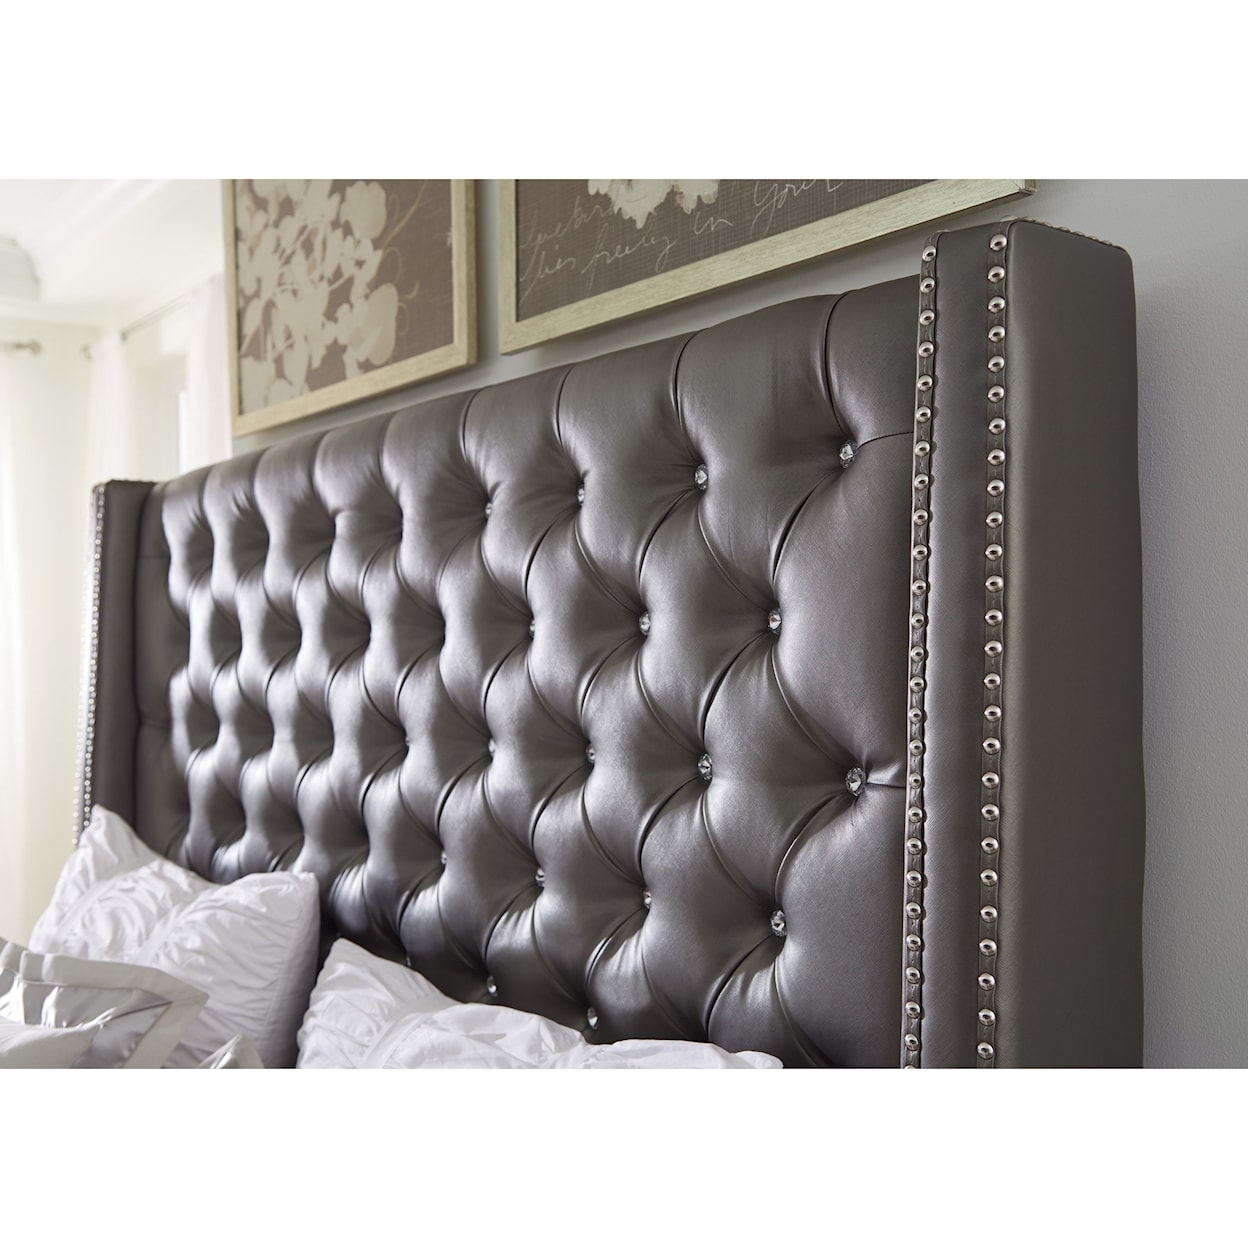 Signature Design by Ashley Coralayne California King Upholstered Bed